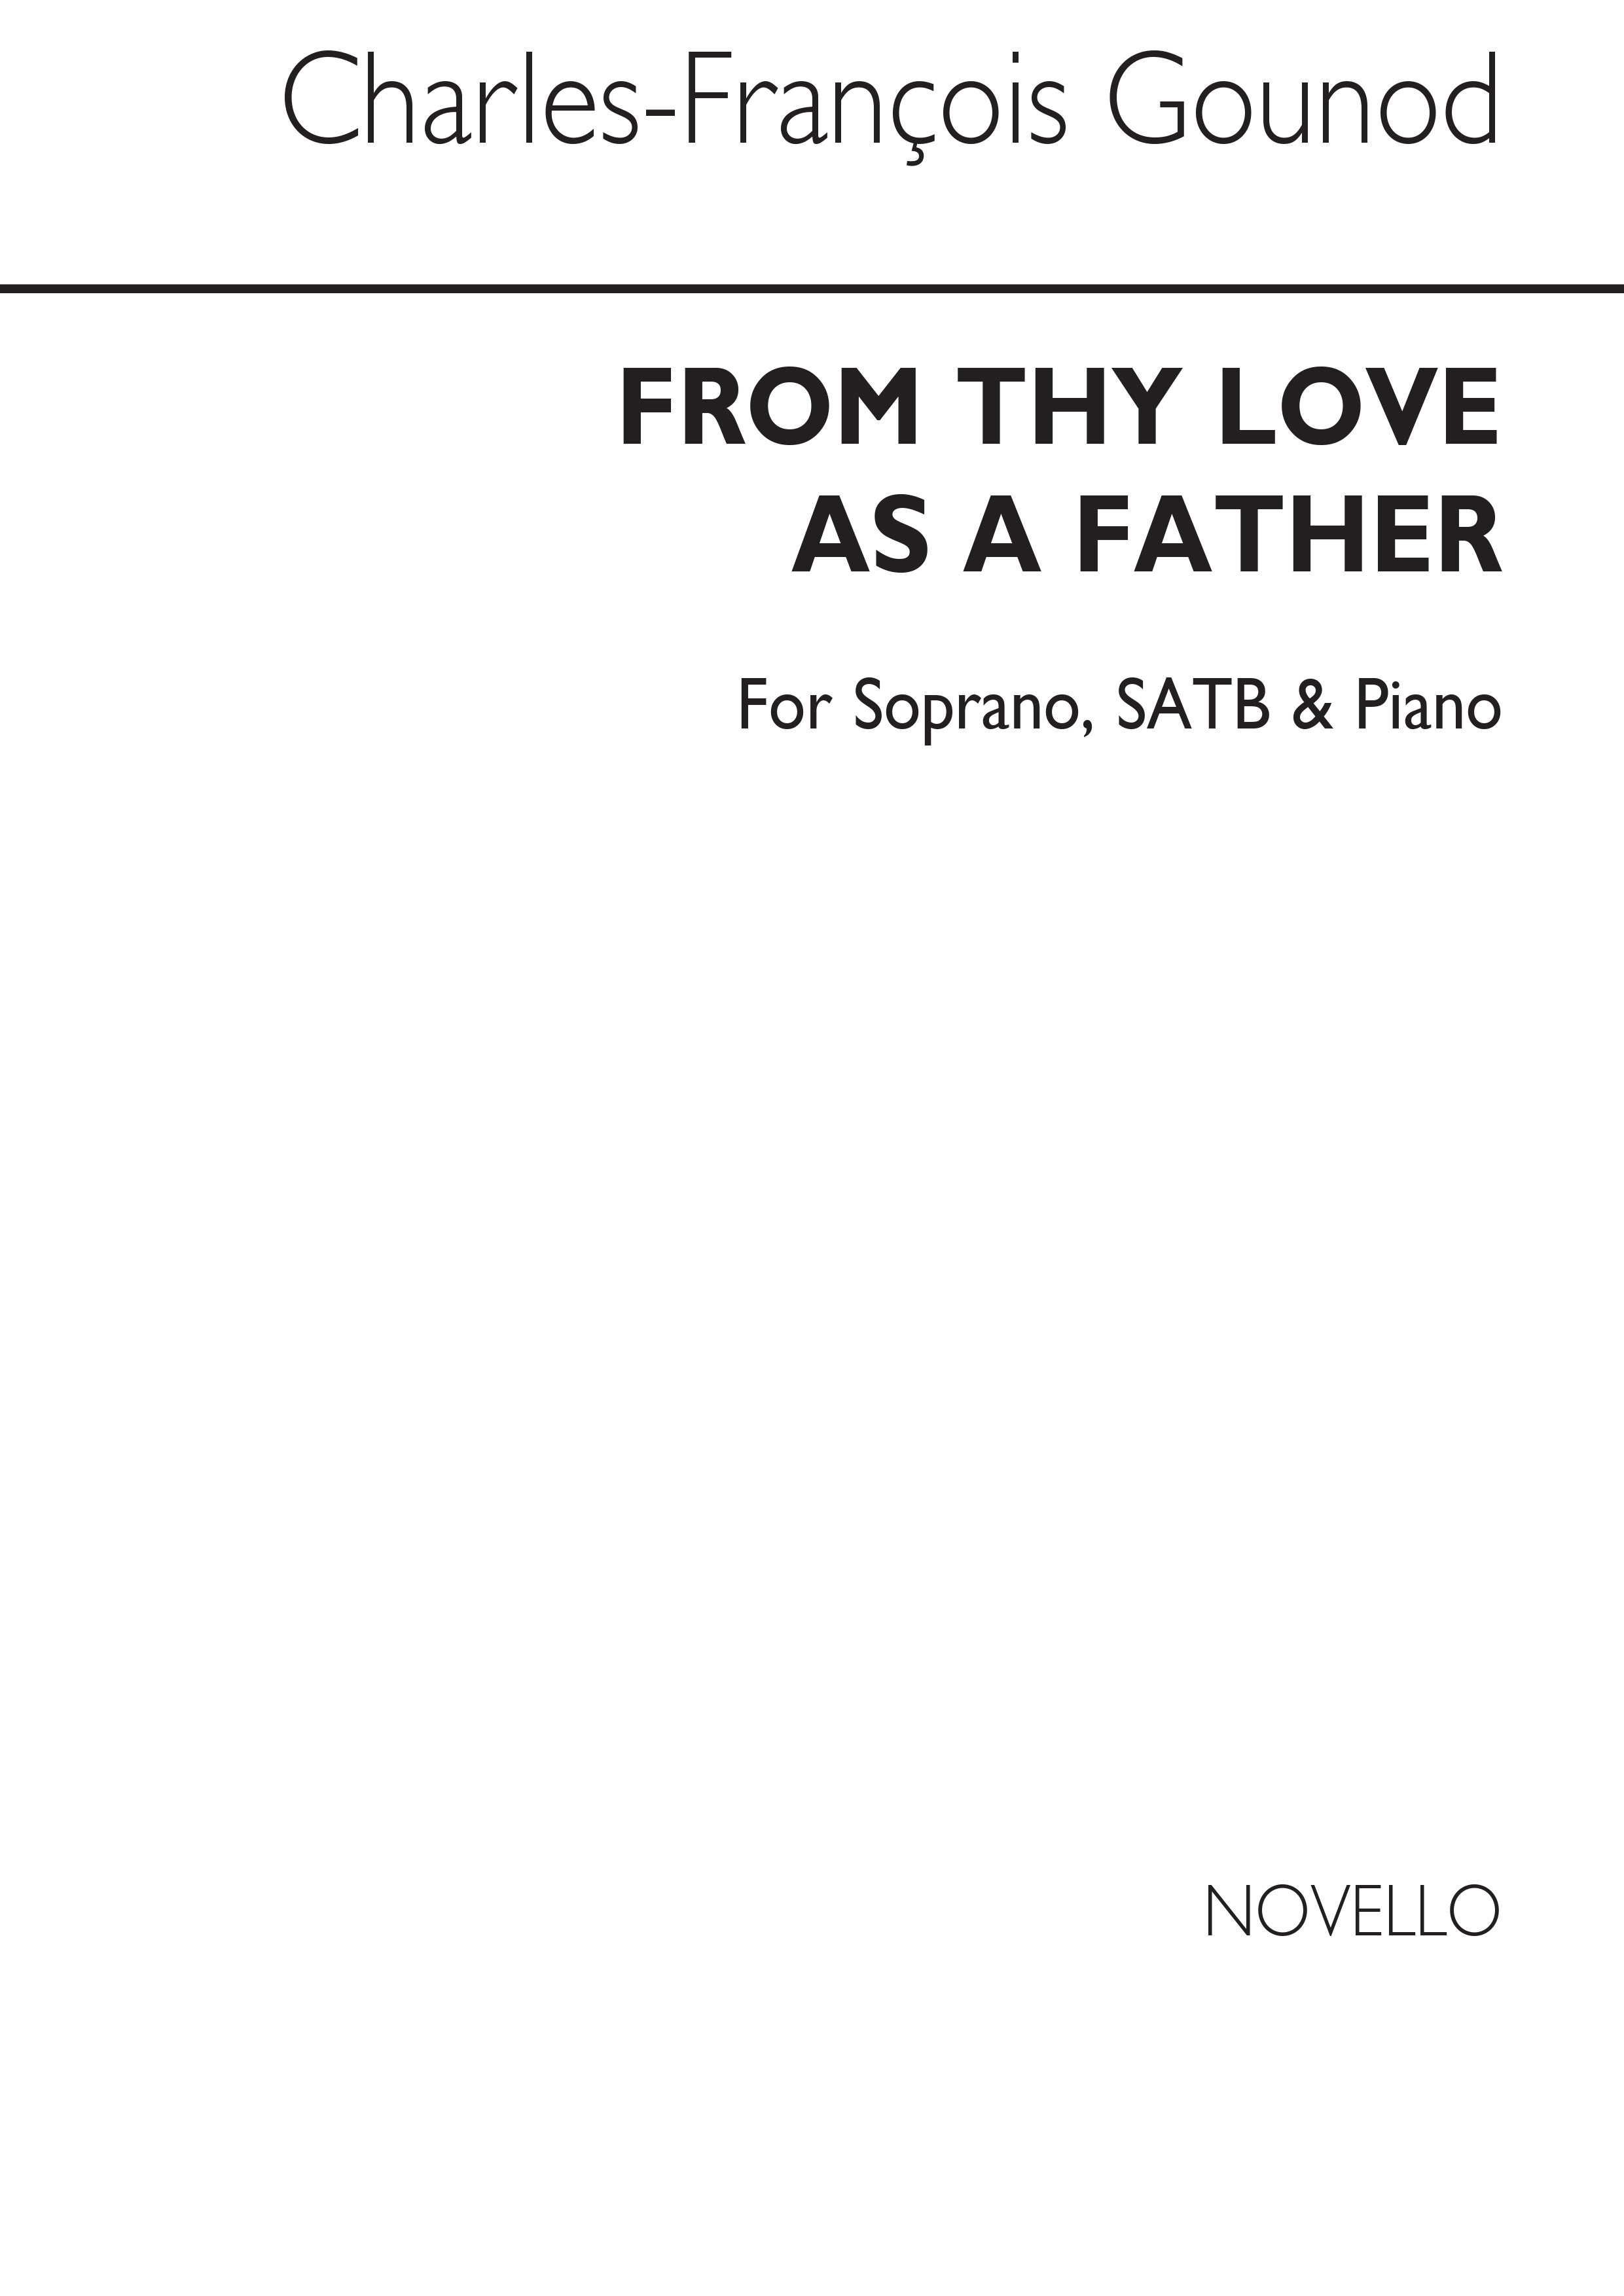 Charles Gounod: From Thy Love As A Father Soprano/Satb/Piano